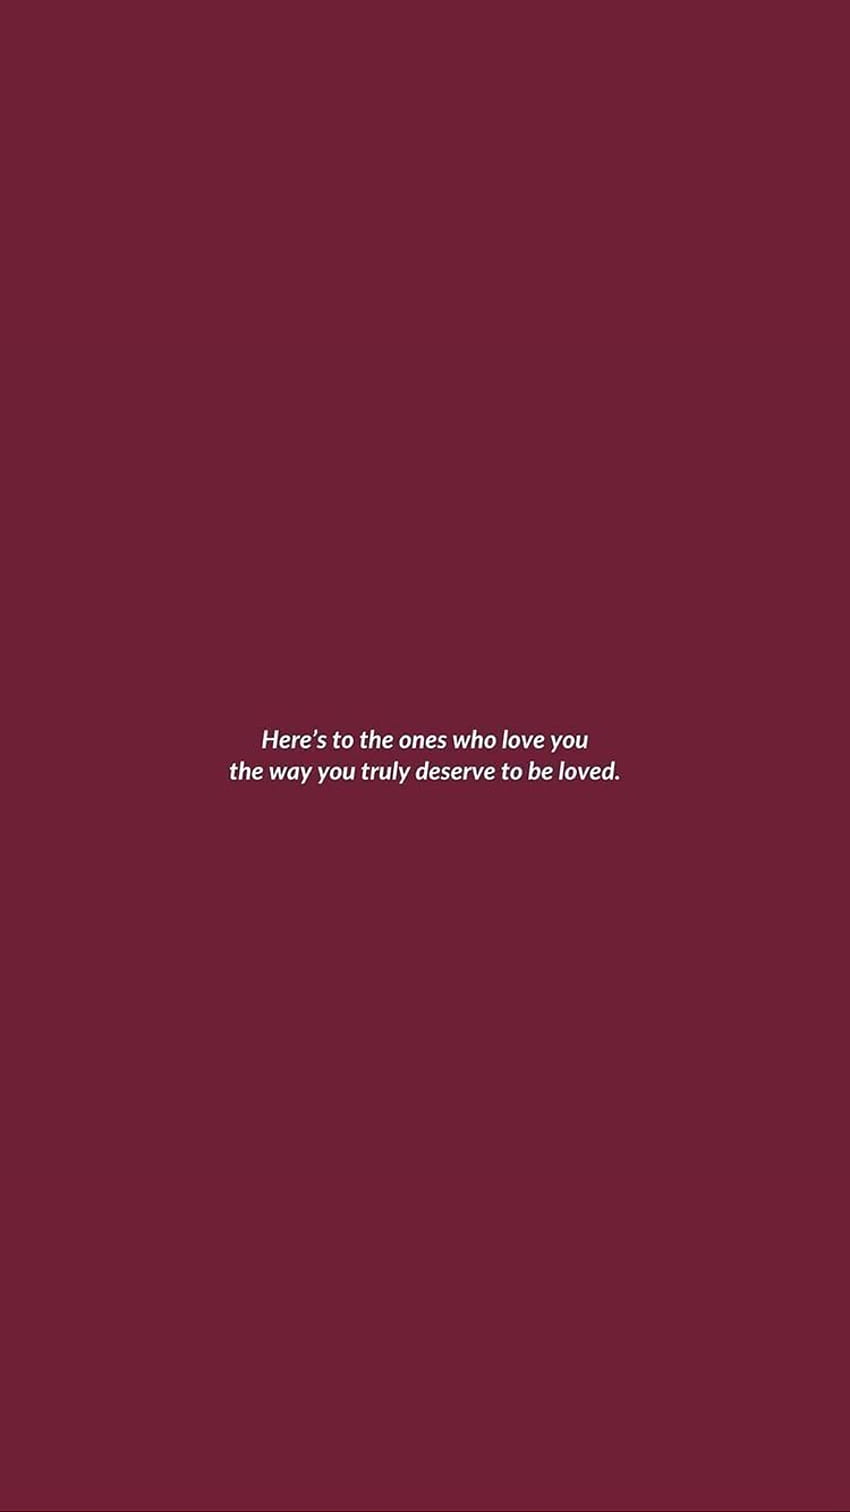 4 Love Aesthetic Backgrounds Short Cute Self Love Quotes HD phone wallpaper